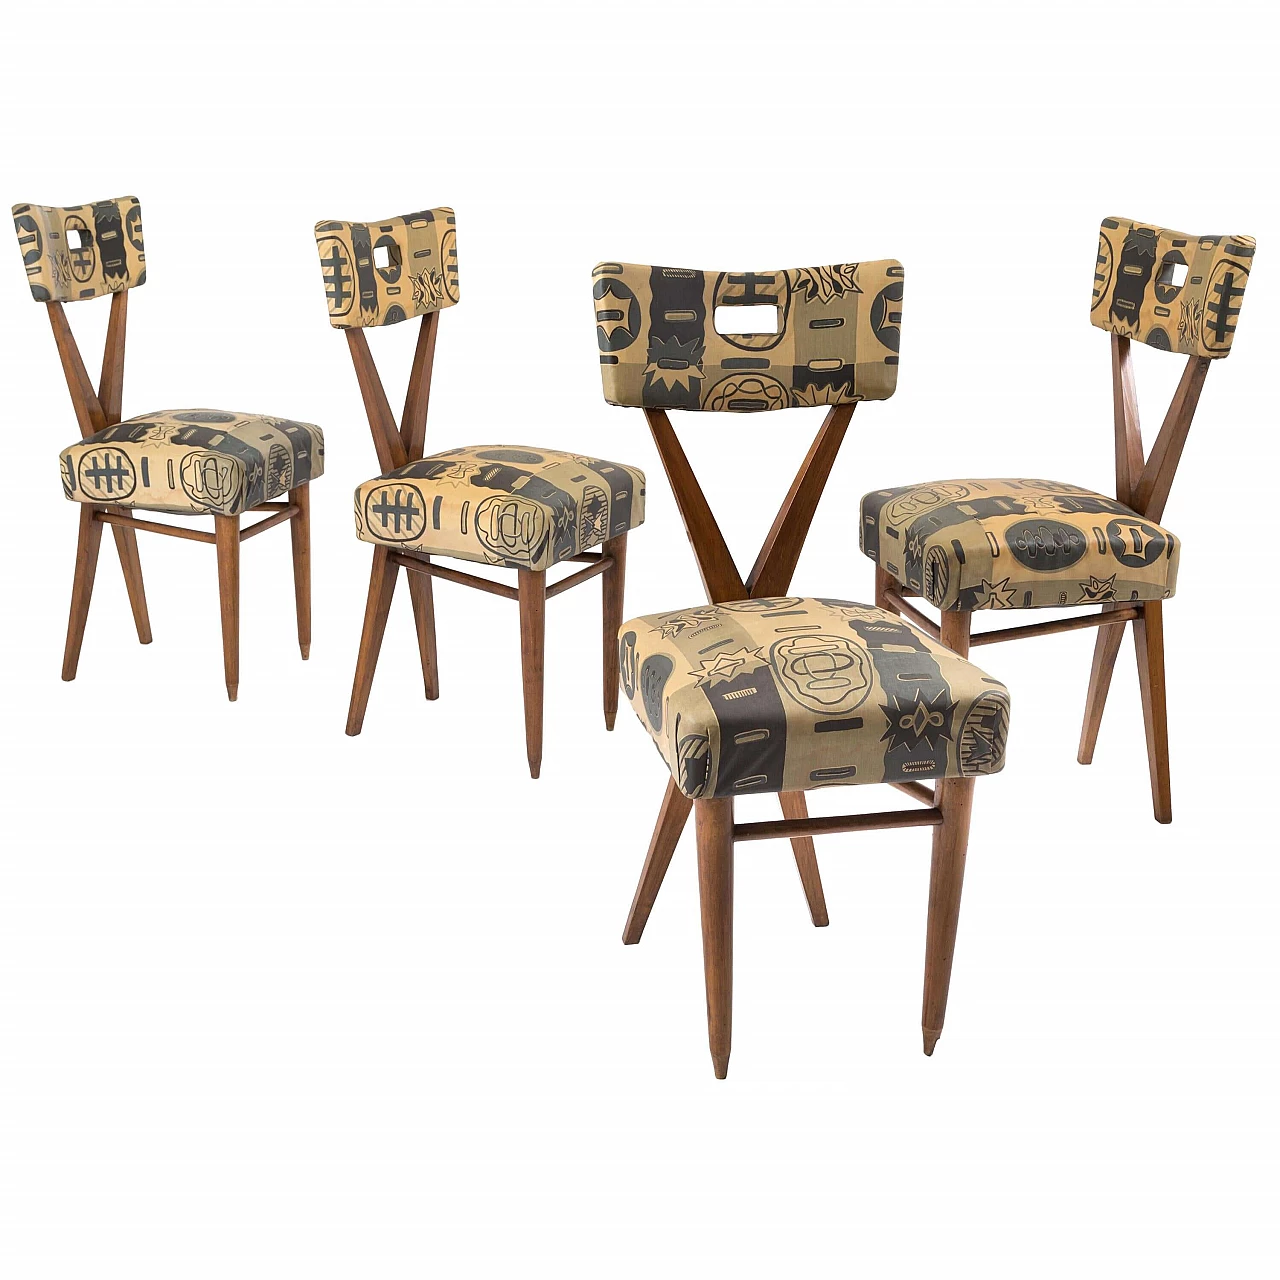 4 Wooden chairs with original fabric by Gianni Vigorelli, 1950s 1406184